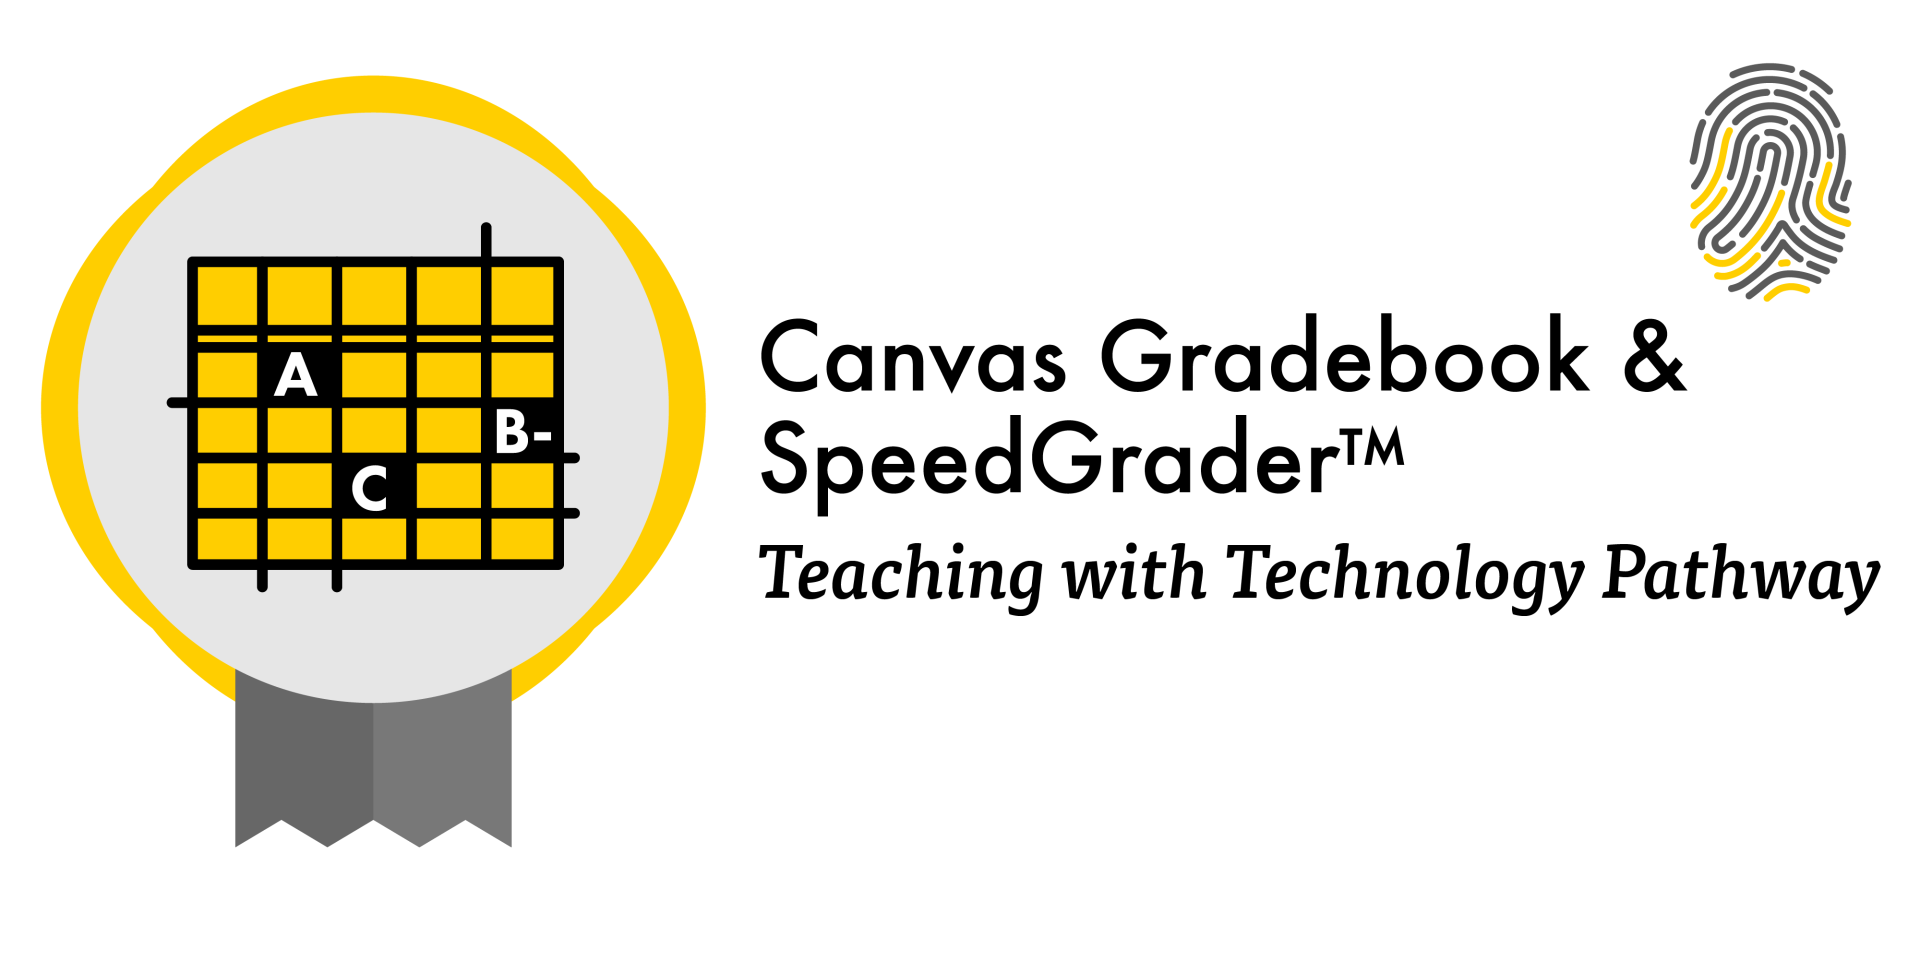 Canvas Gradebook and SpeedGrader, Teaching with Technology Pathway